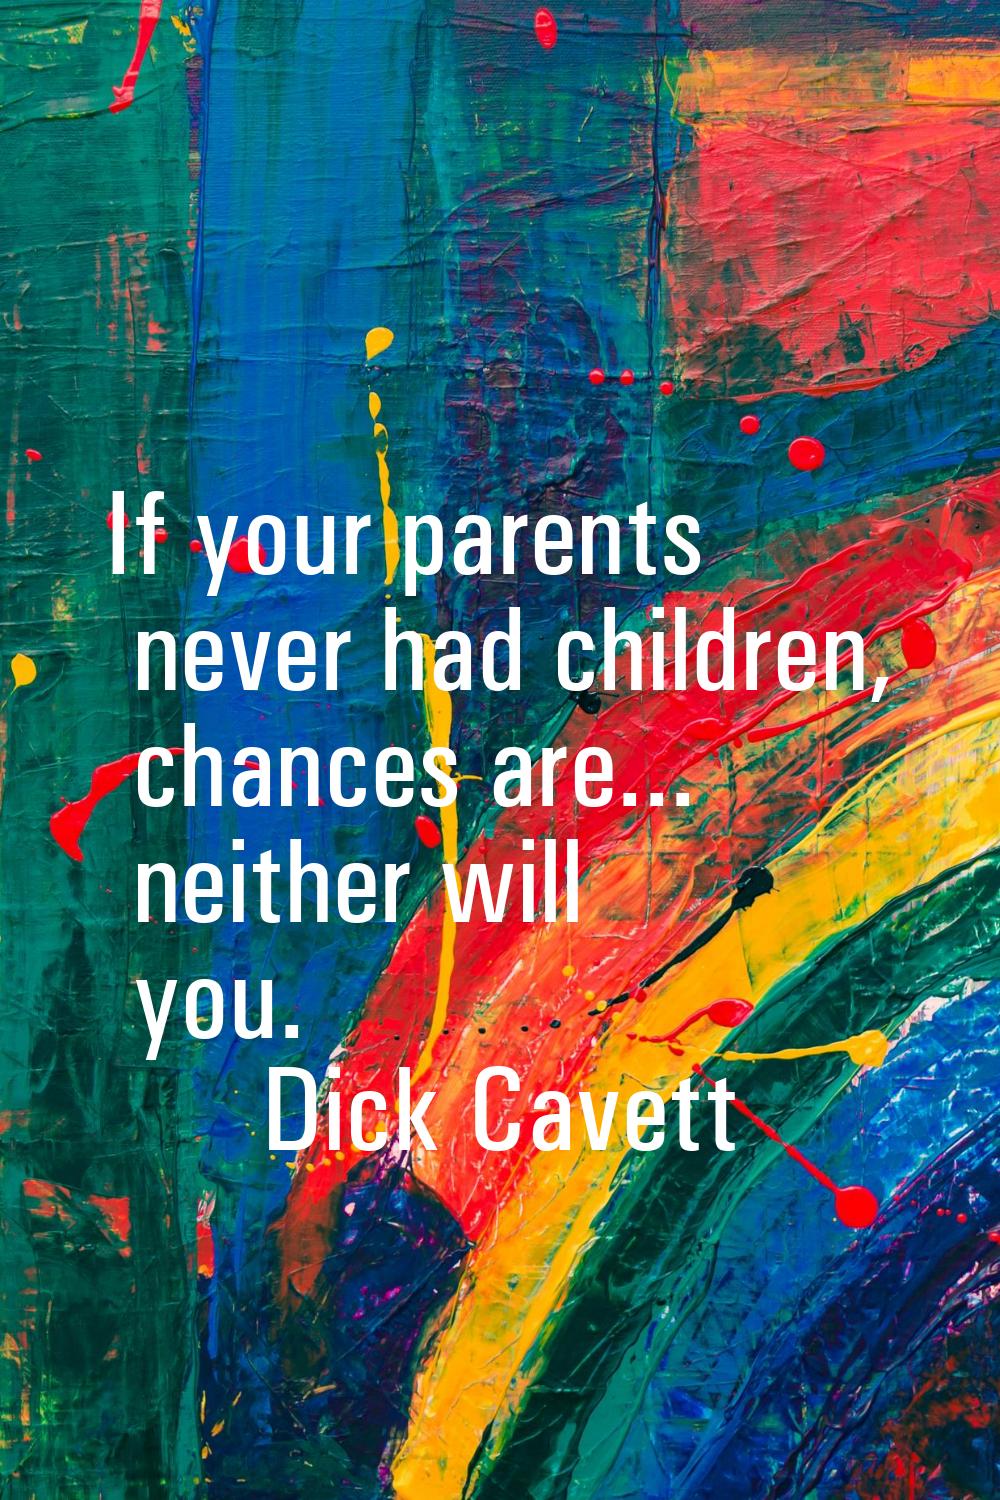 If your parents never had children, chances are... neither will you.